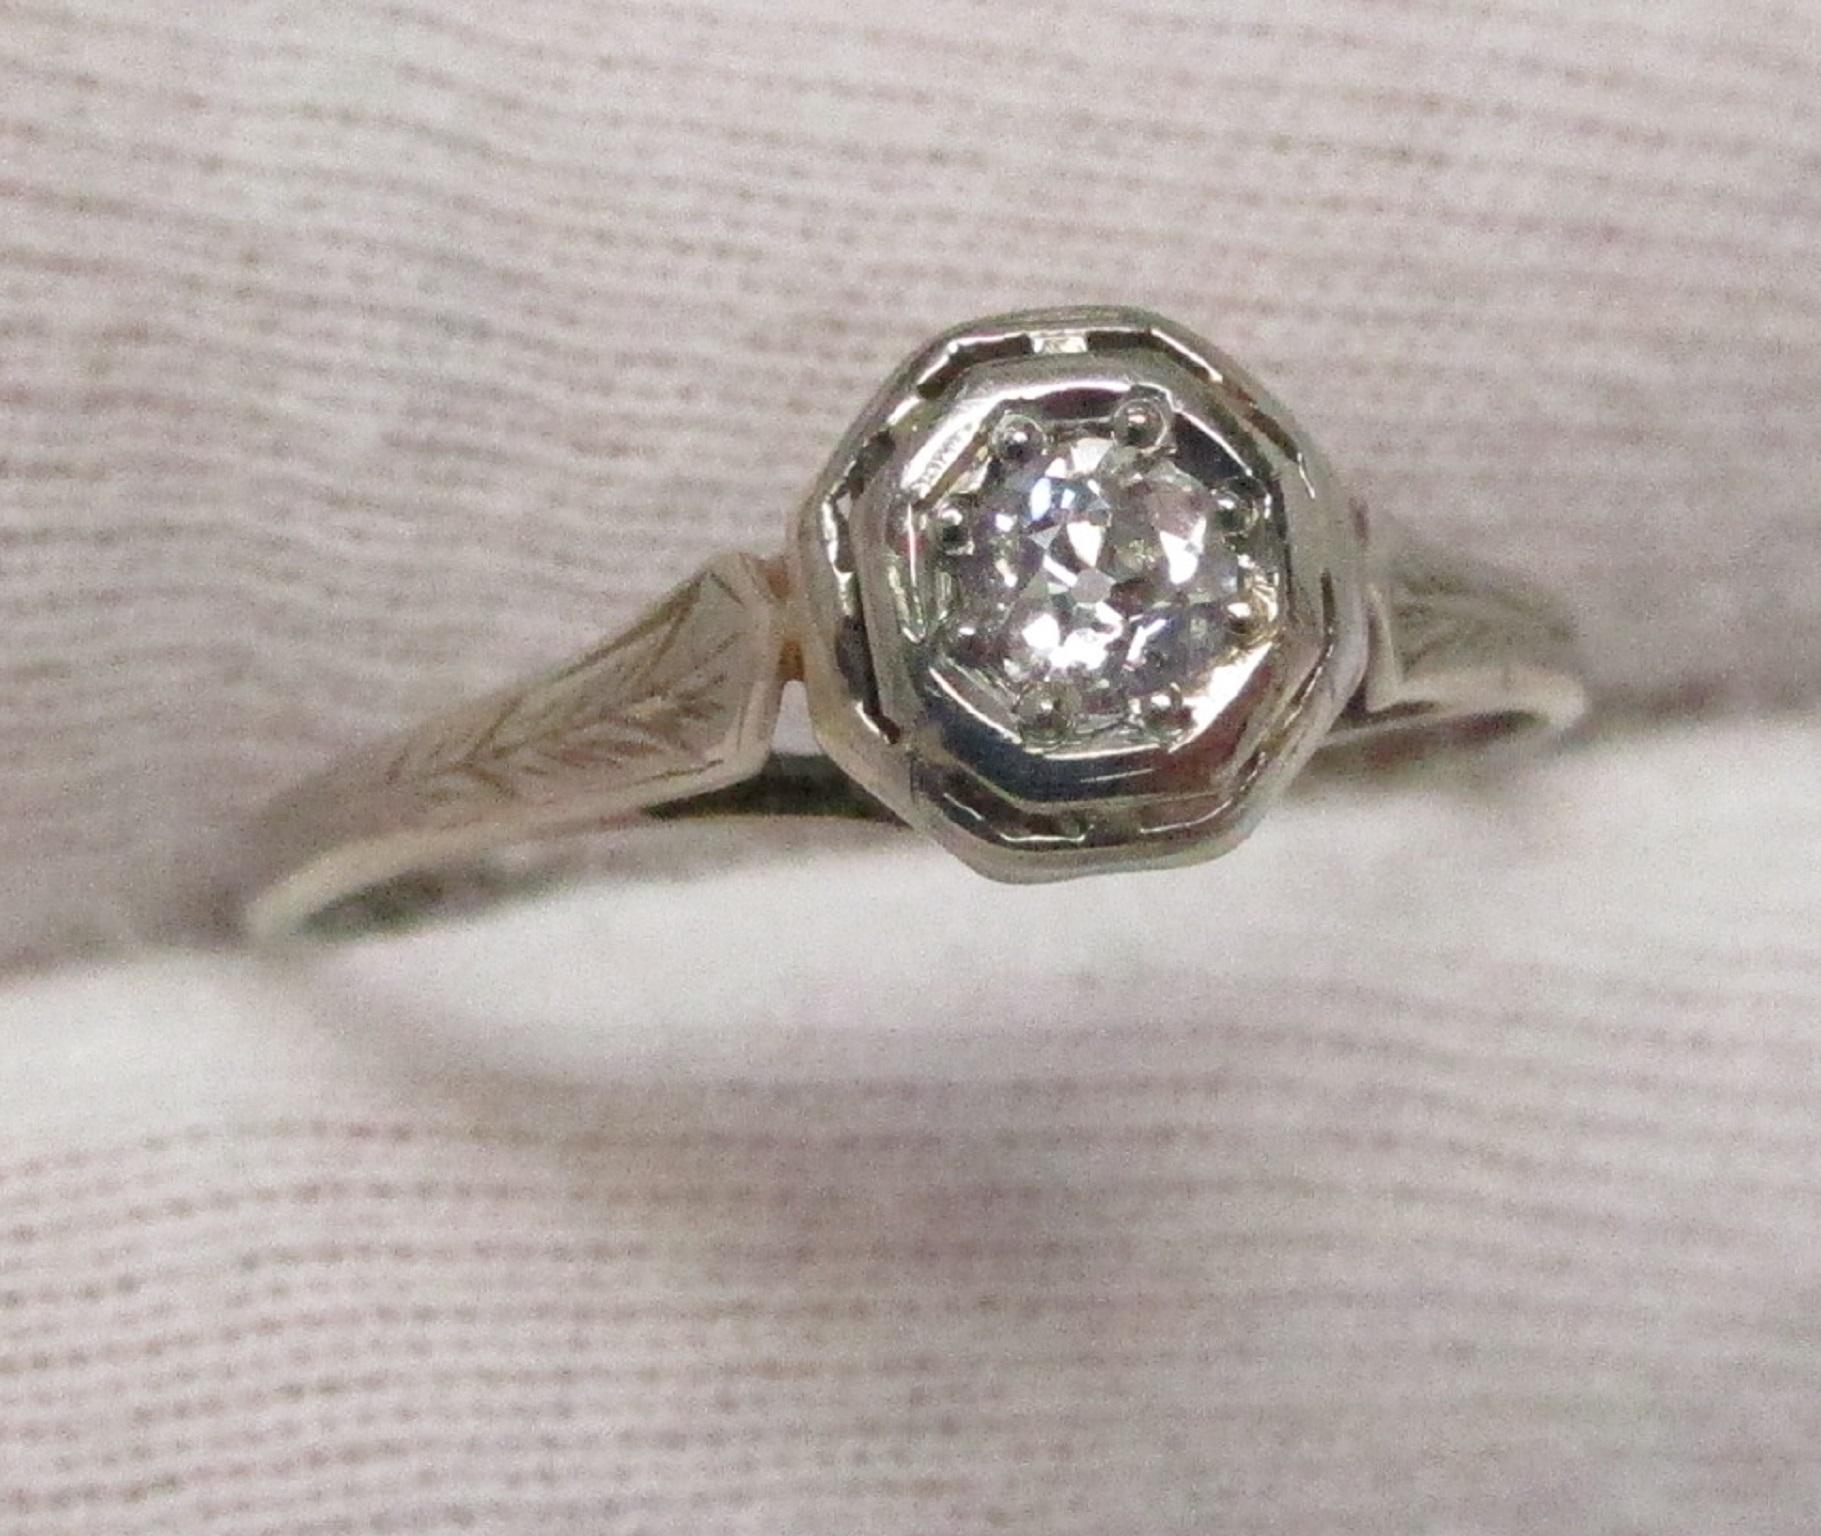 This fetching Art Deco 18K white gold filigree engagement ring features a 0.20ct Old Mine Cut diamond, H color and SI1 clarity. This ring is very comfortable to wear. The diamond is bead set, so there are no prongs to catch on things.

The ring is a